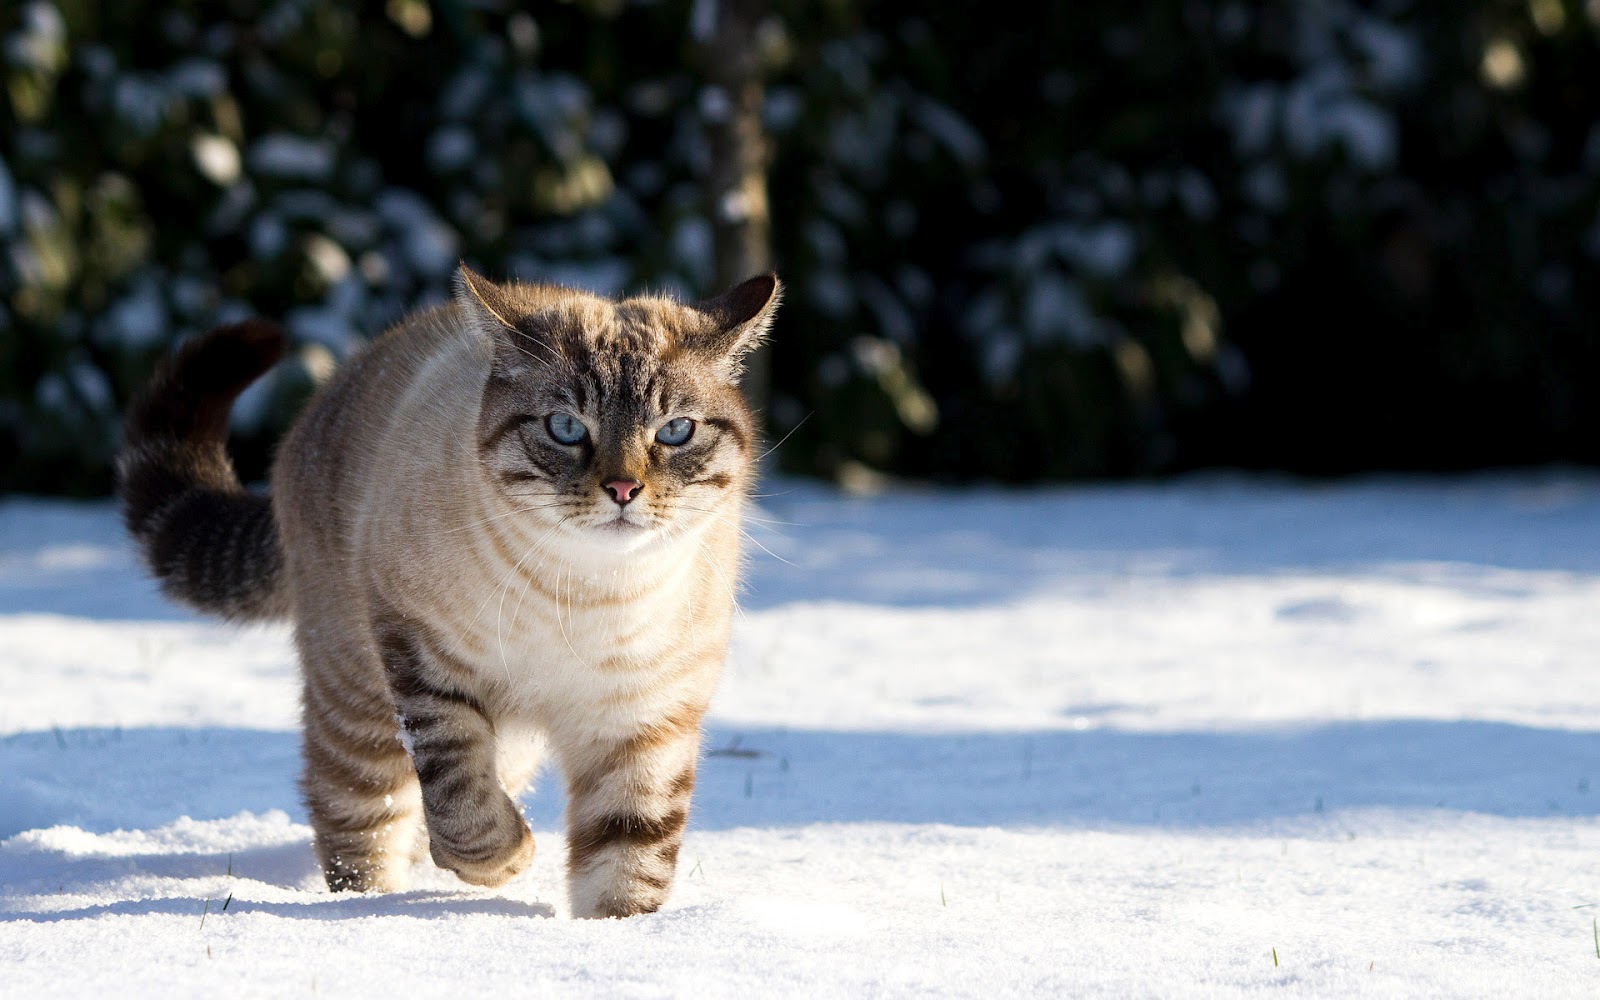  wallpaper with a cute cat walking in the snow  HD cat wallpaper